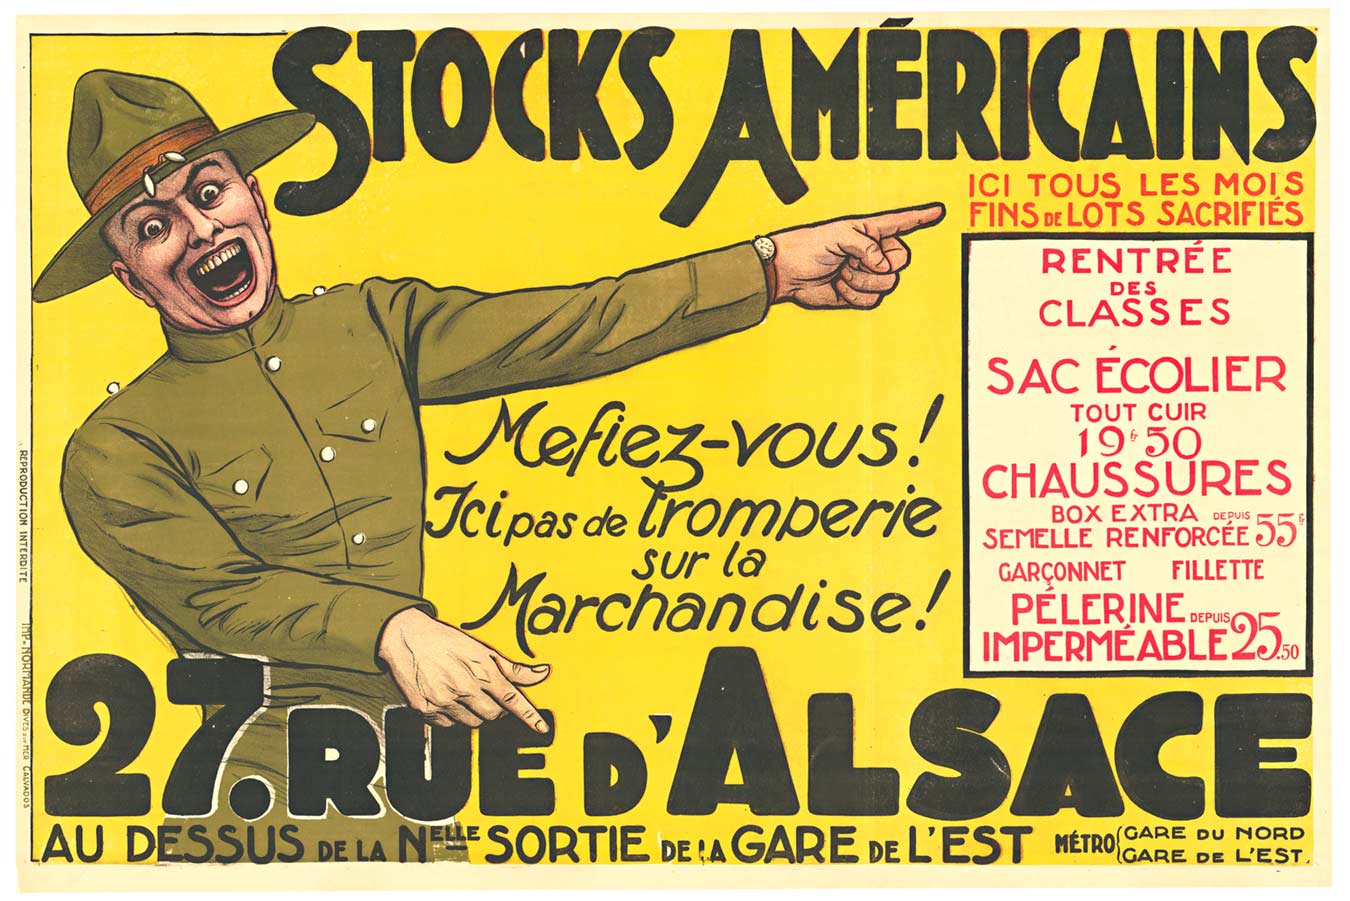 American stocks for sale. A loud guy selling them